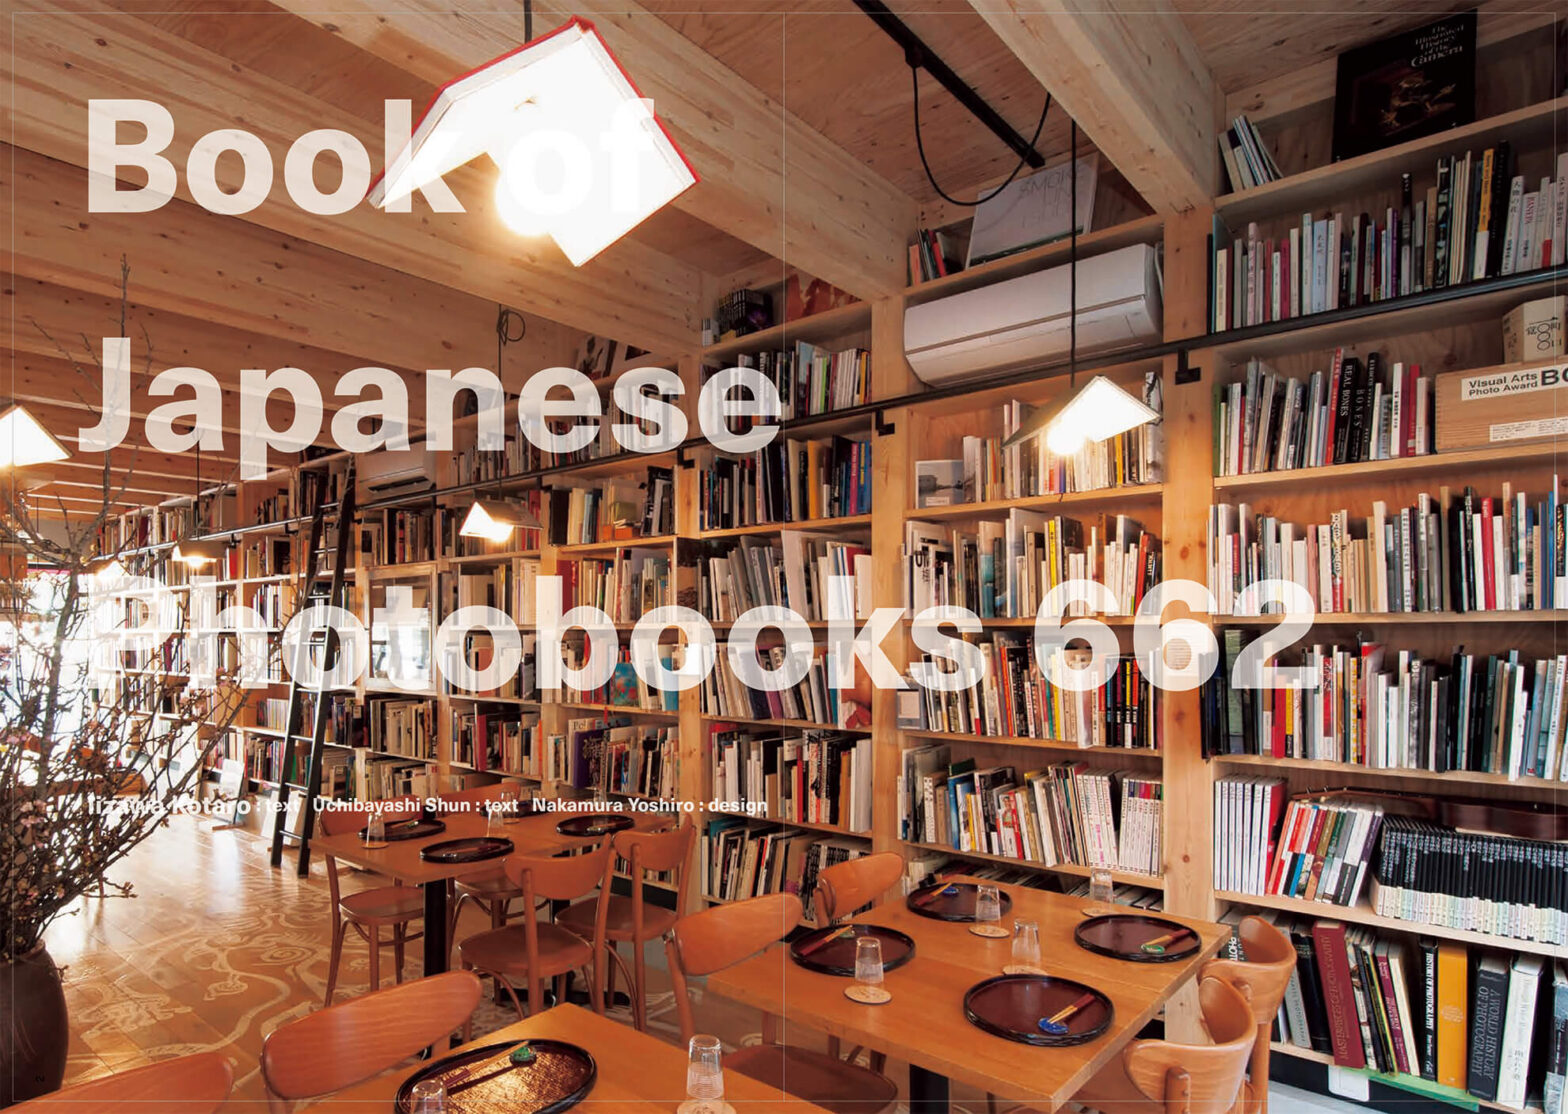 Book-of-Japanese-books-662